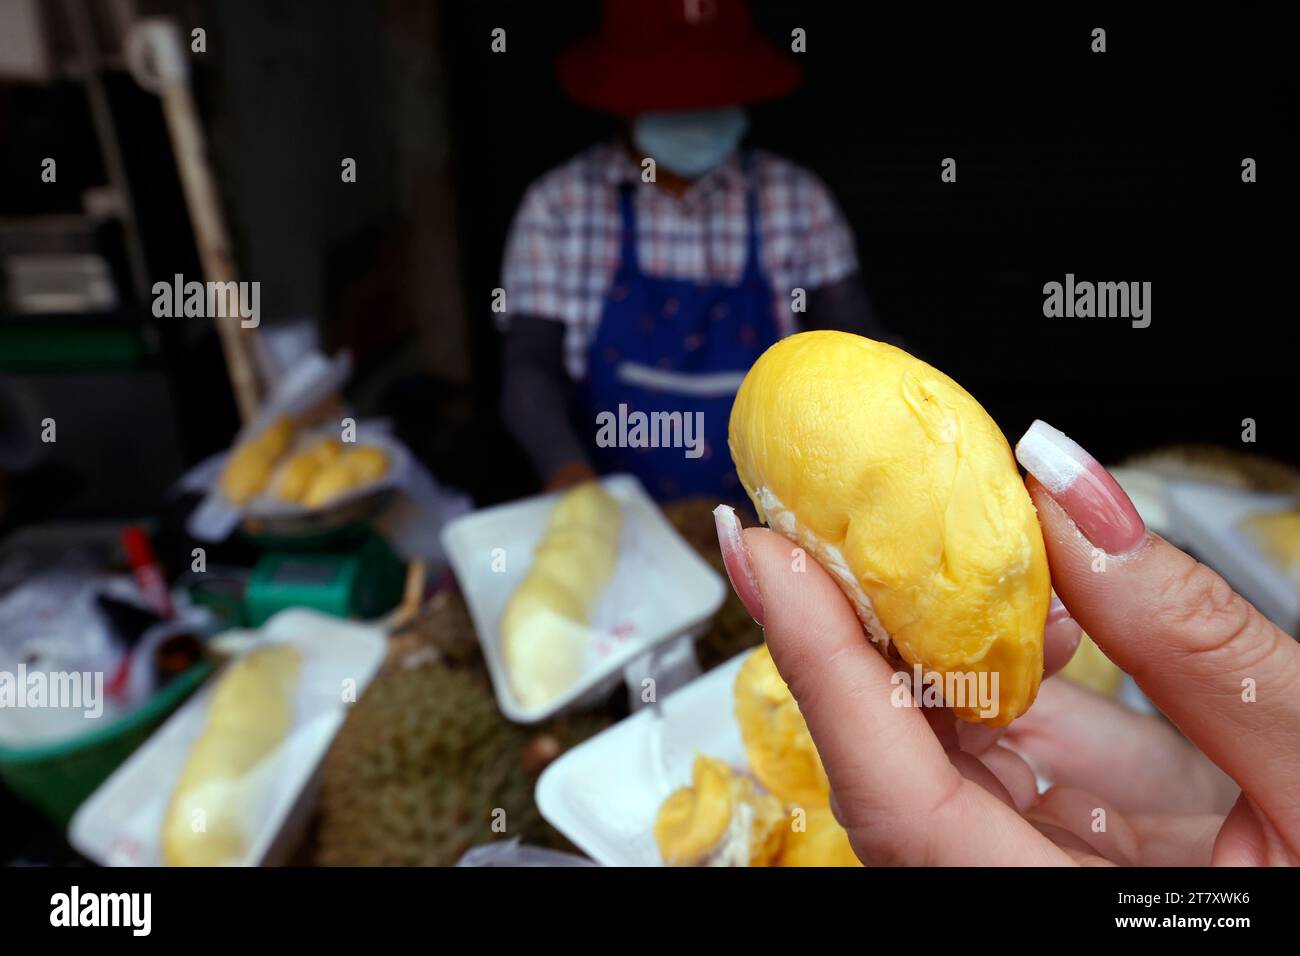 A woman prepares Durian fruit for sale at a street food stall popular with tourists and locals, Bangkok, Thailand, Southeast Asia, Asia Stock Photo